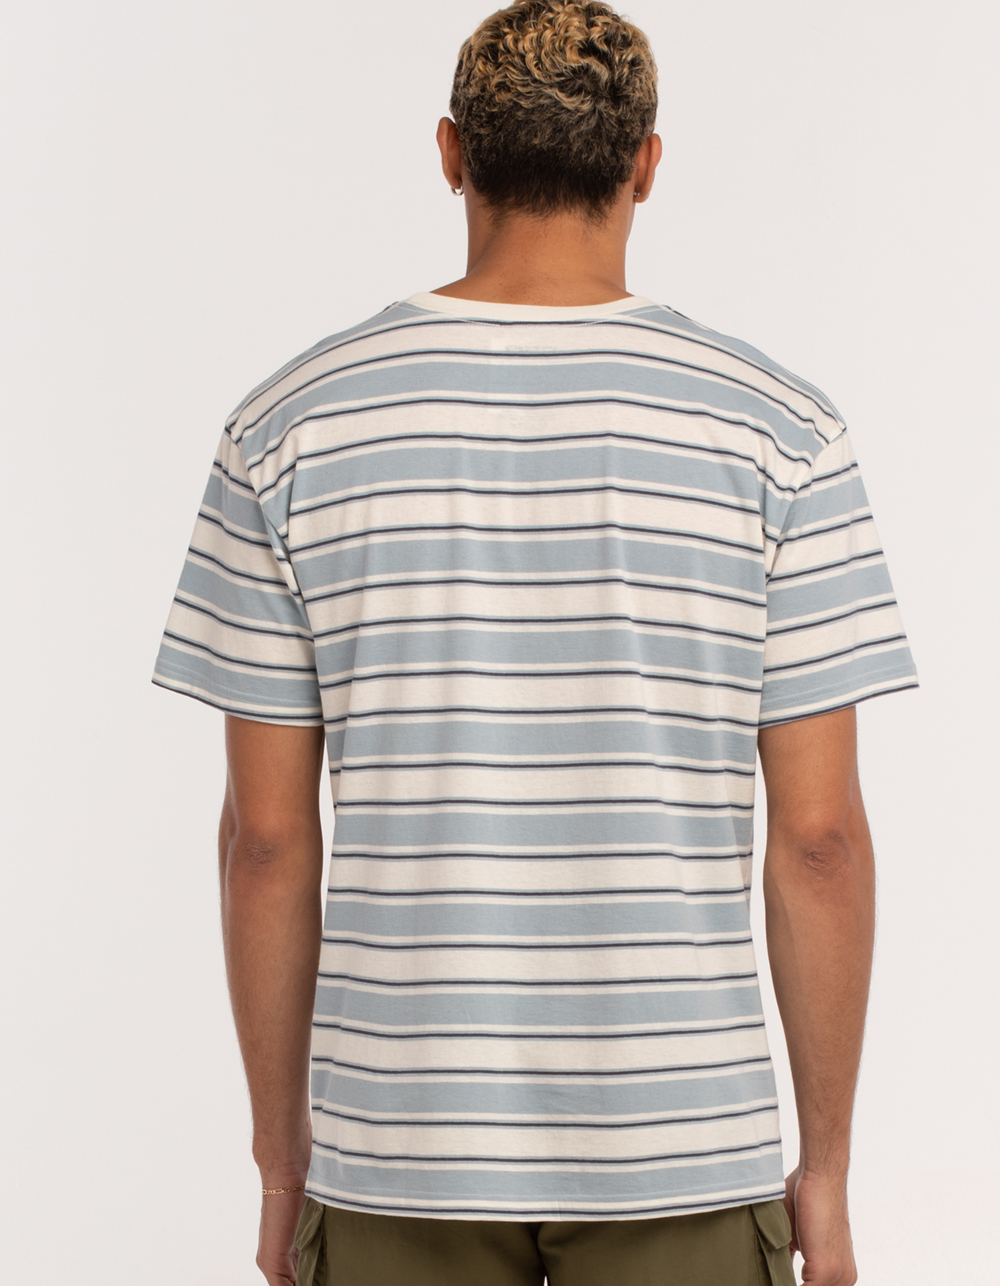 RSQ Oversized Striped Mens Tee - WHT/BLUE | Tillys